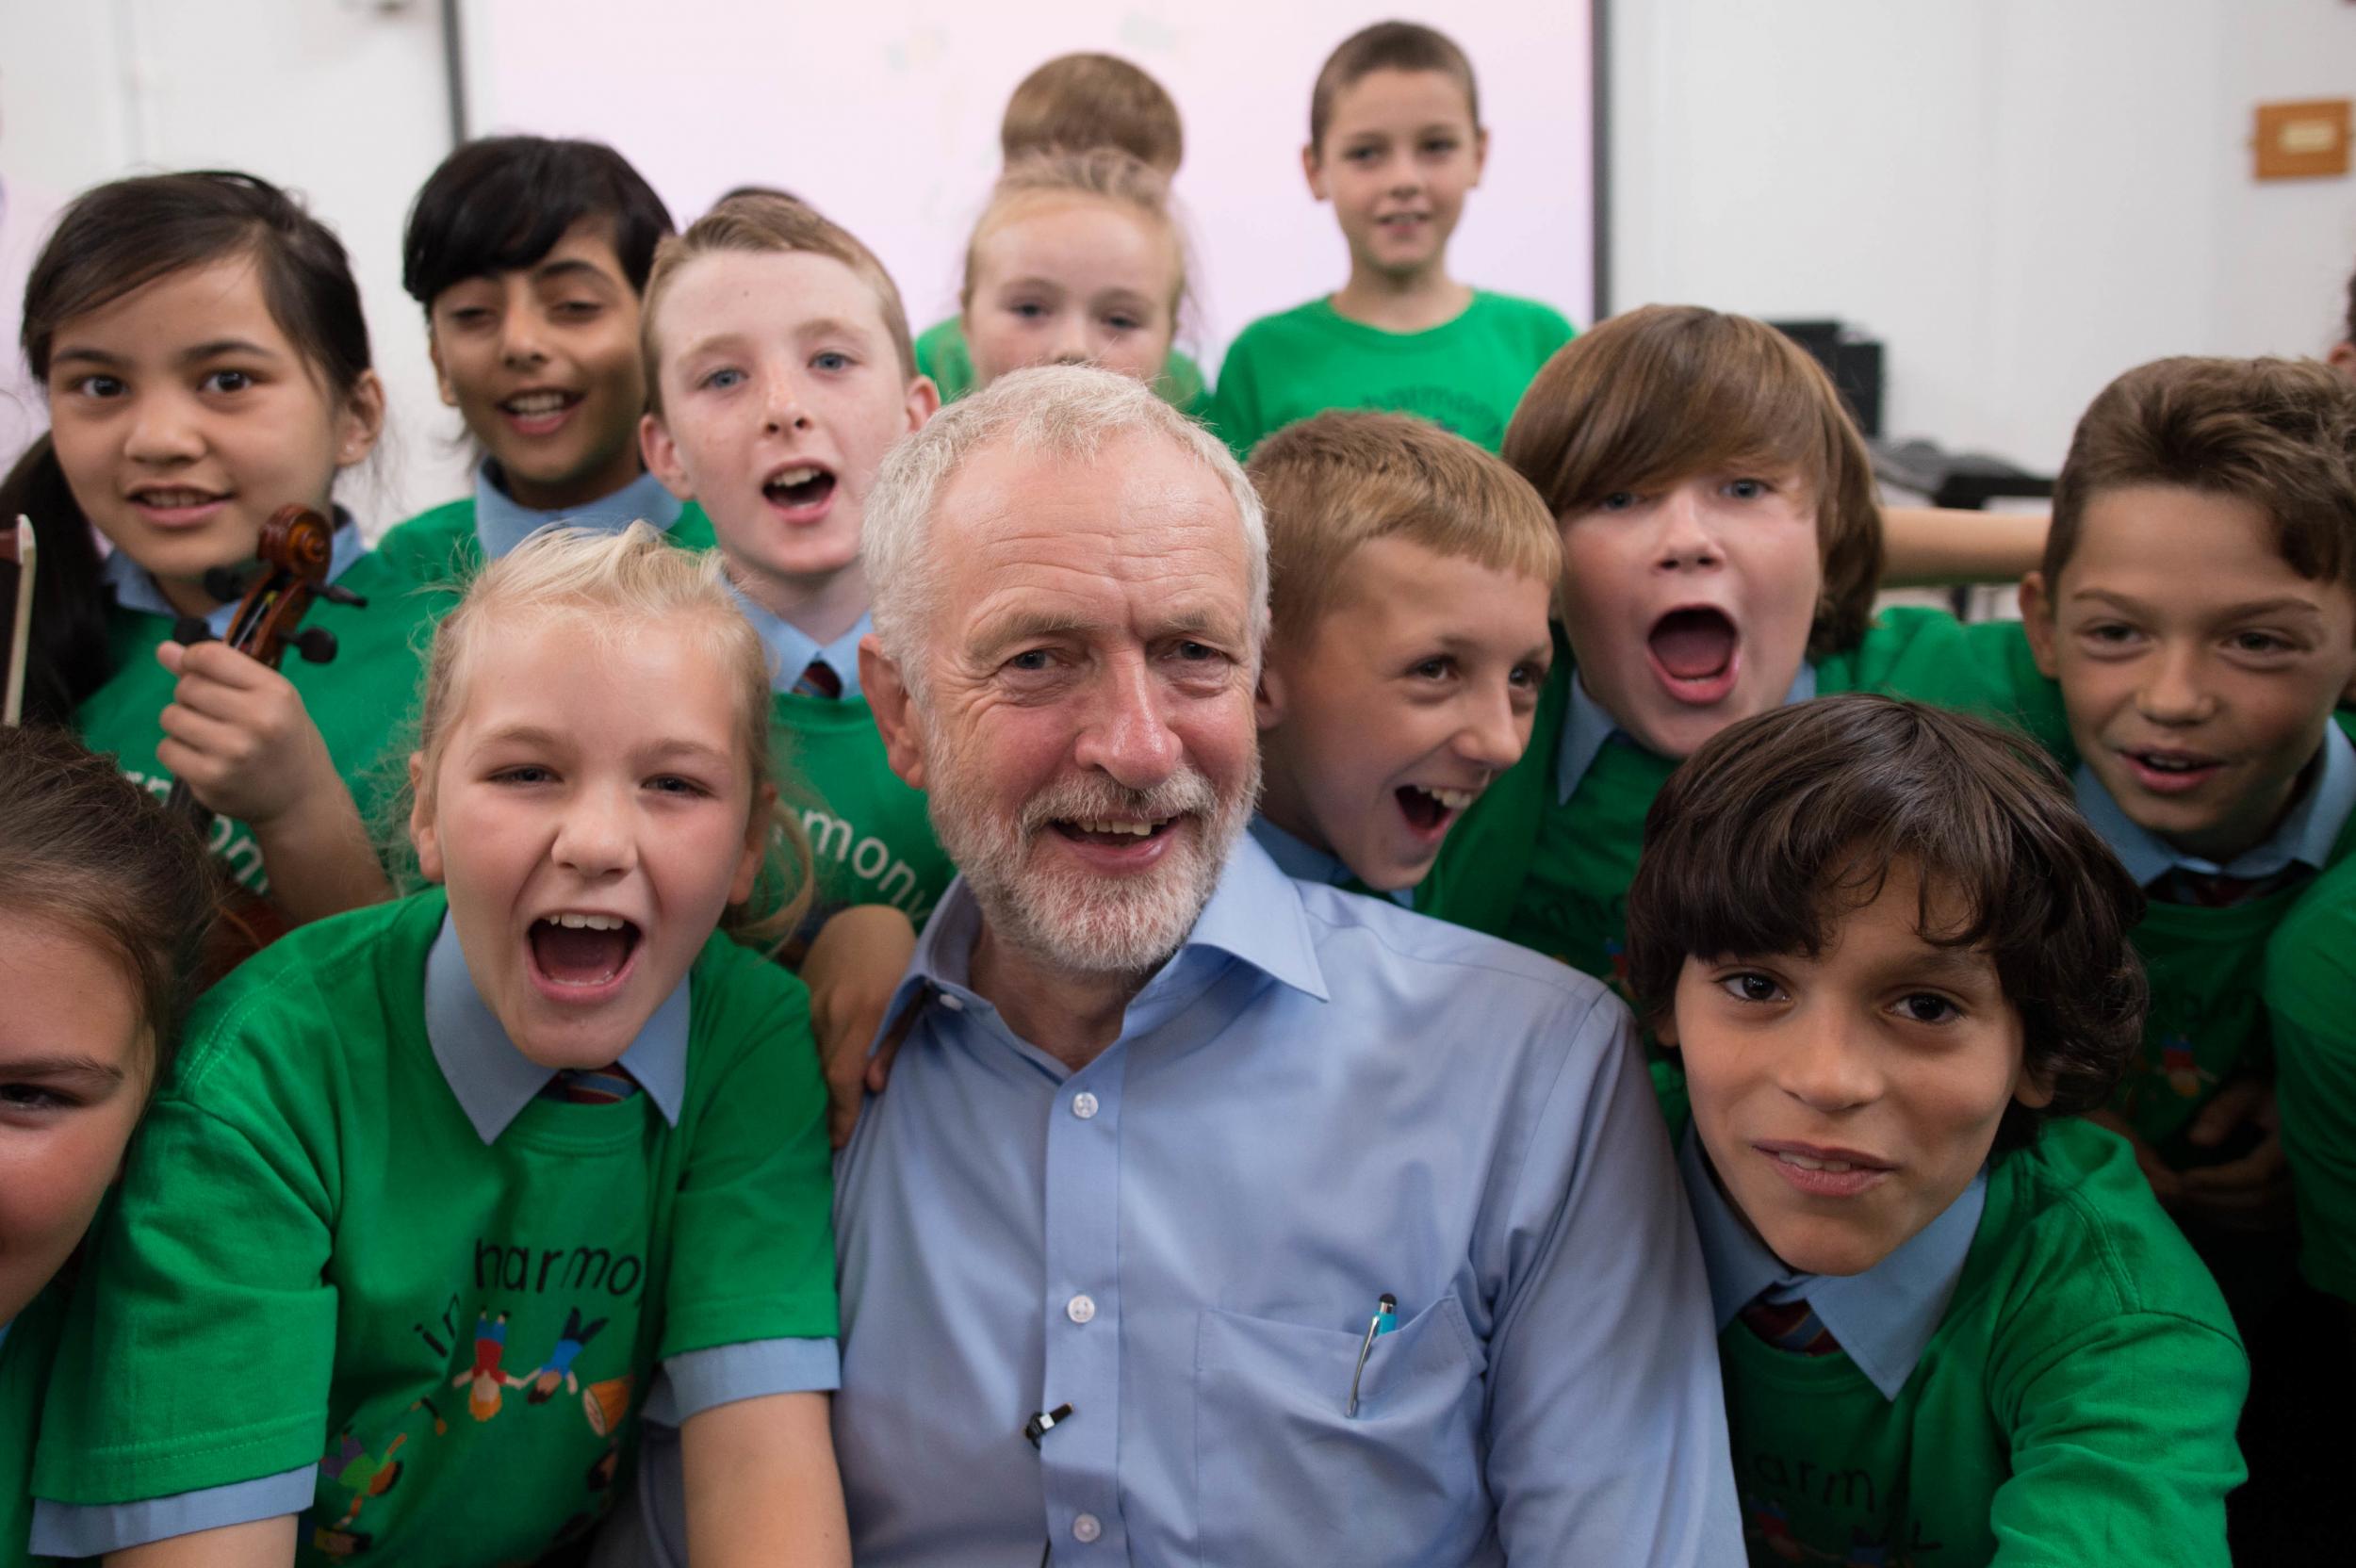 Labour will abolish Sats exams in primary schools, Jeremy Corbyn says